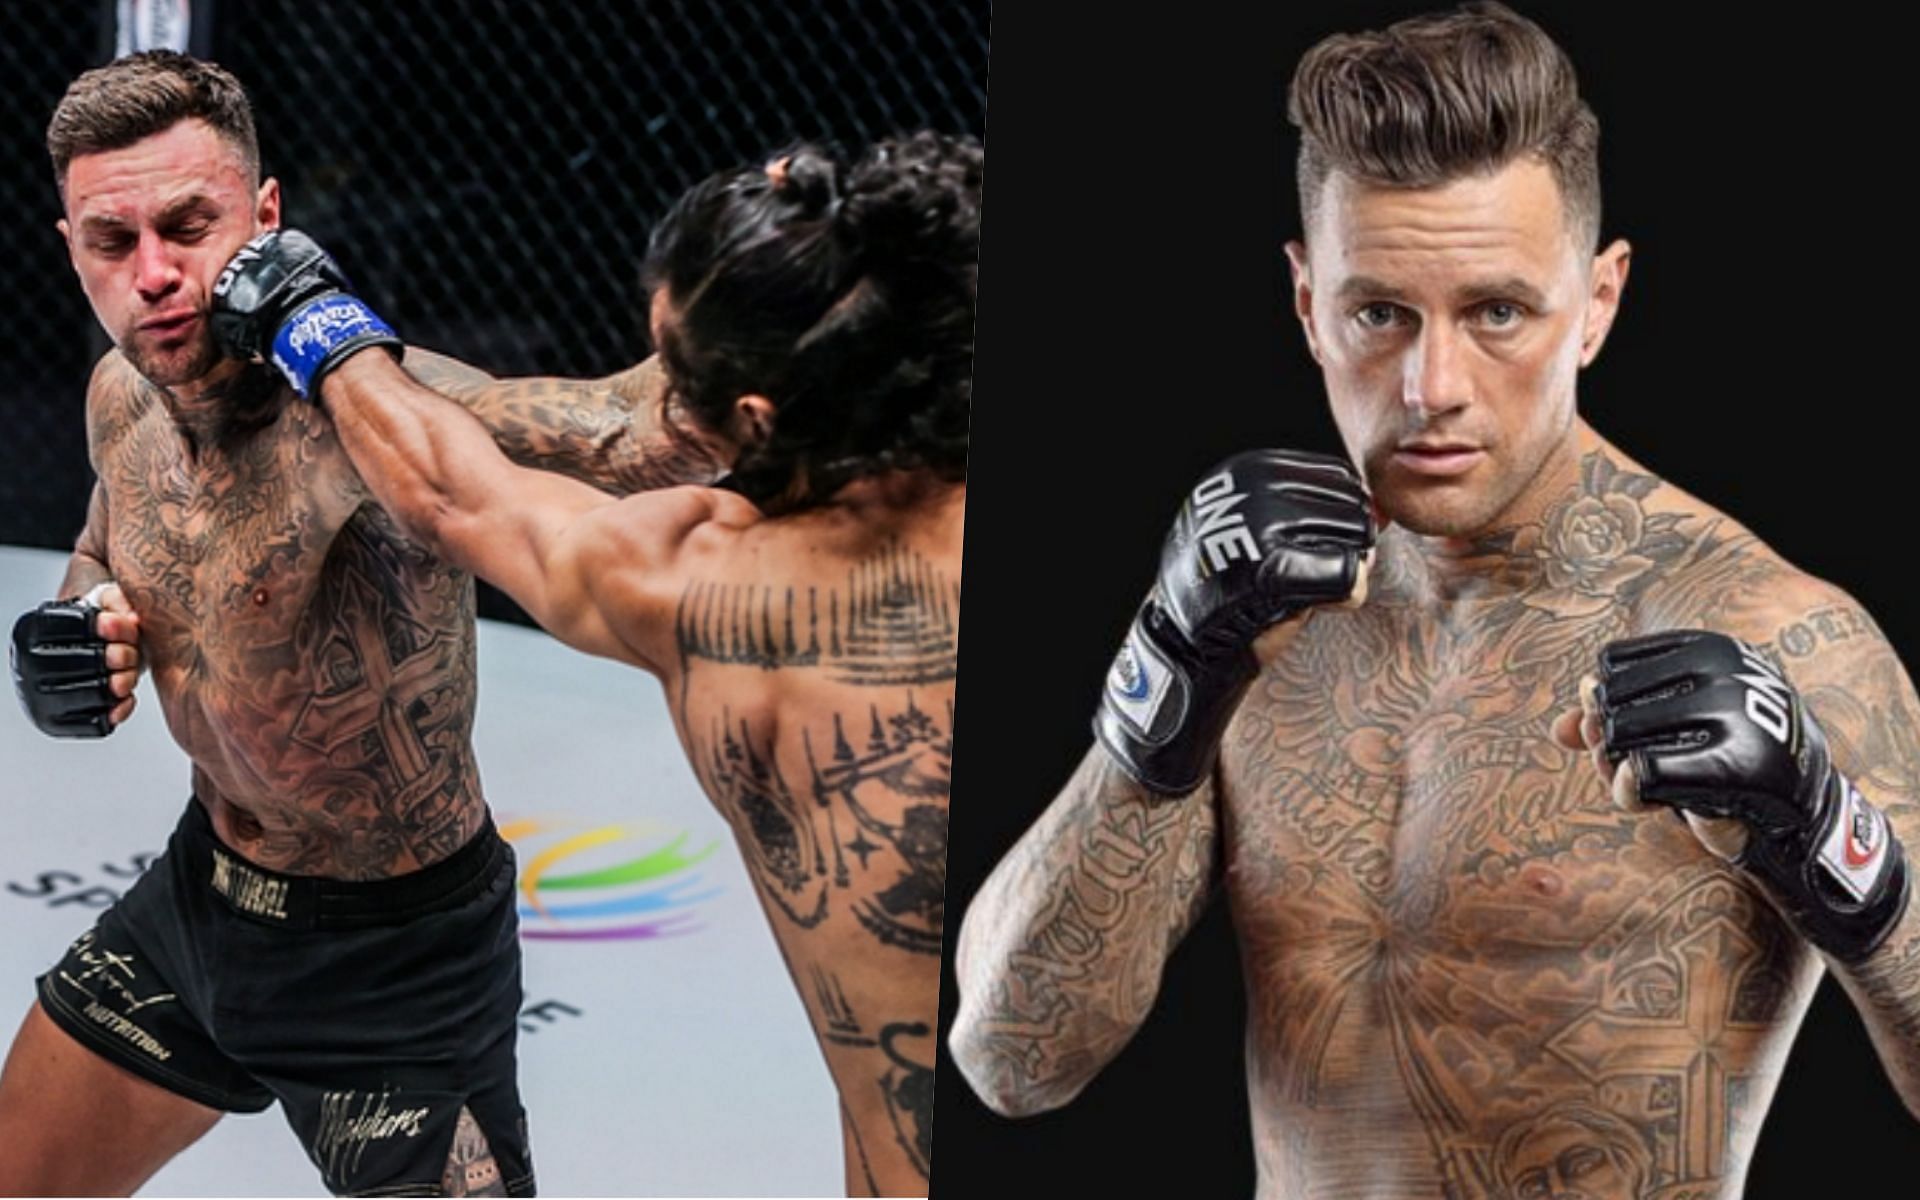 Nieky Holzken -- Photo by ONE Championship